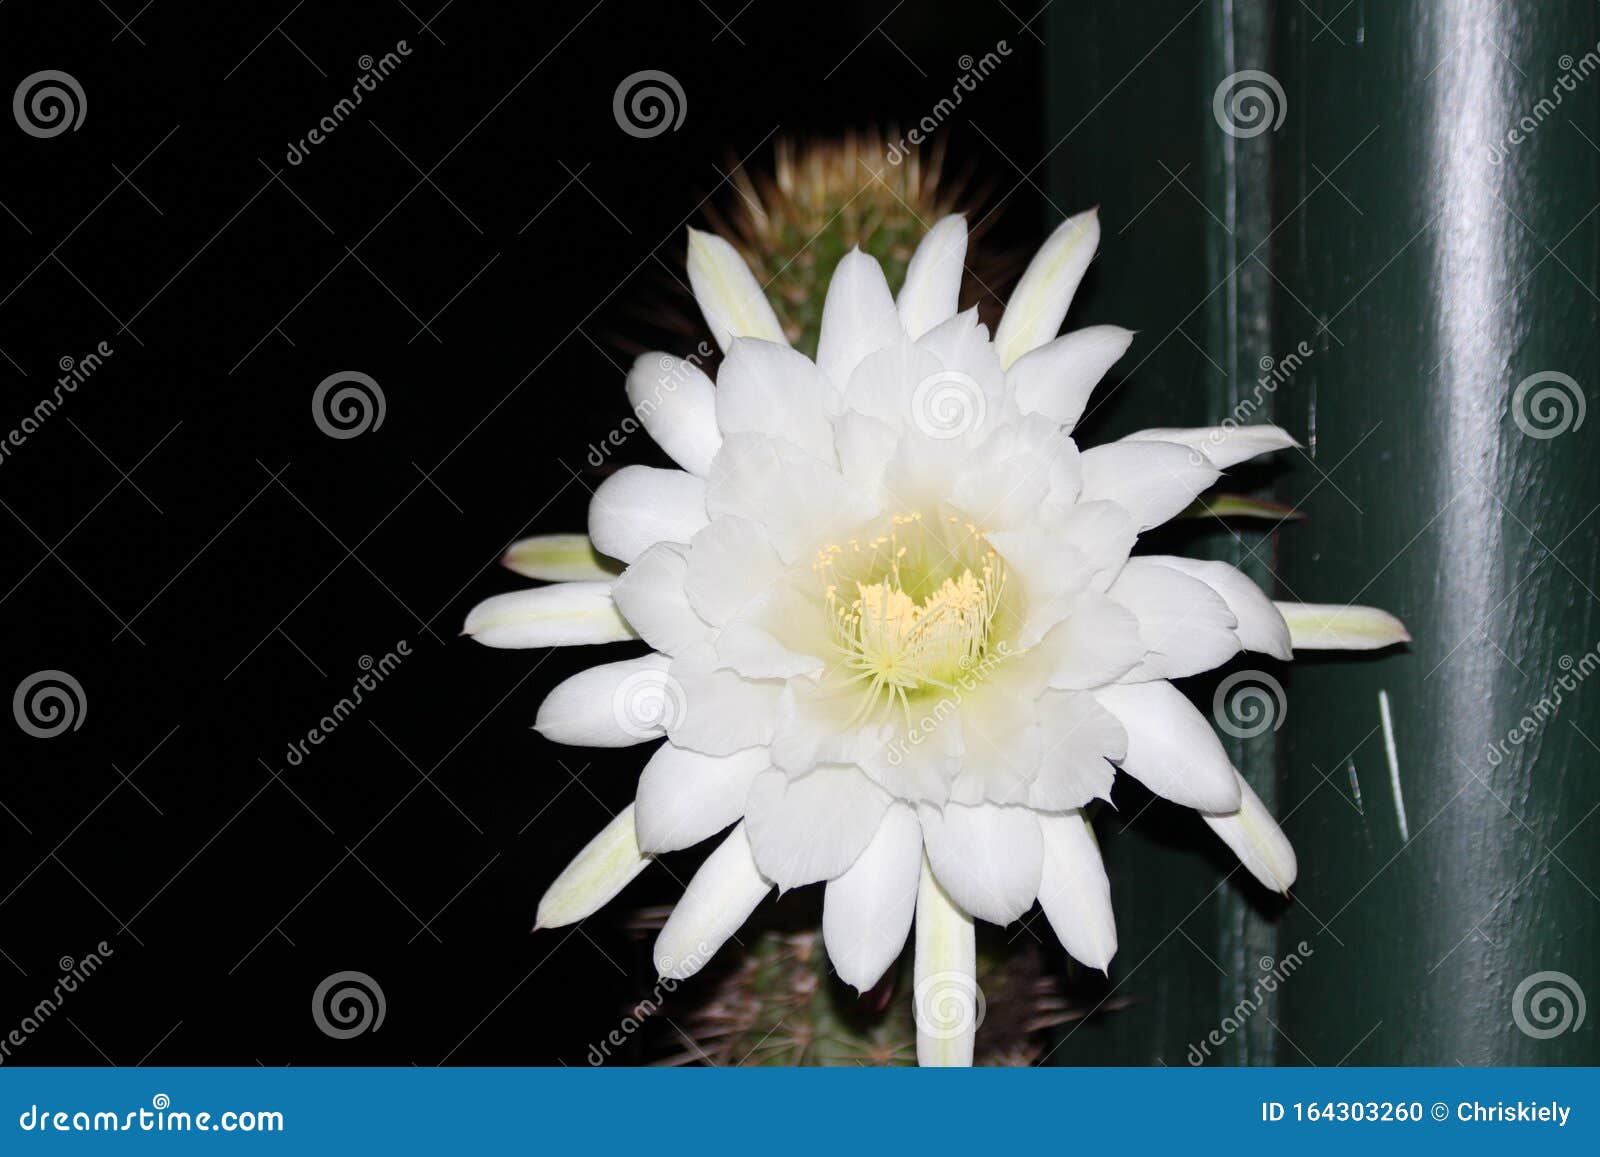 White Cactus Flower At Night Stock Photo Image Of White Beauty 164303260,How Long Should My Curtains Be For 10 Foot Ceilings